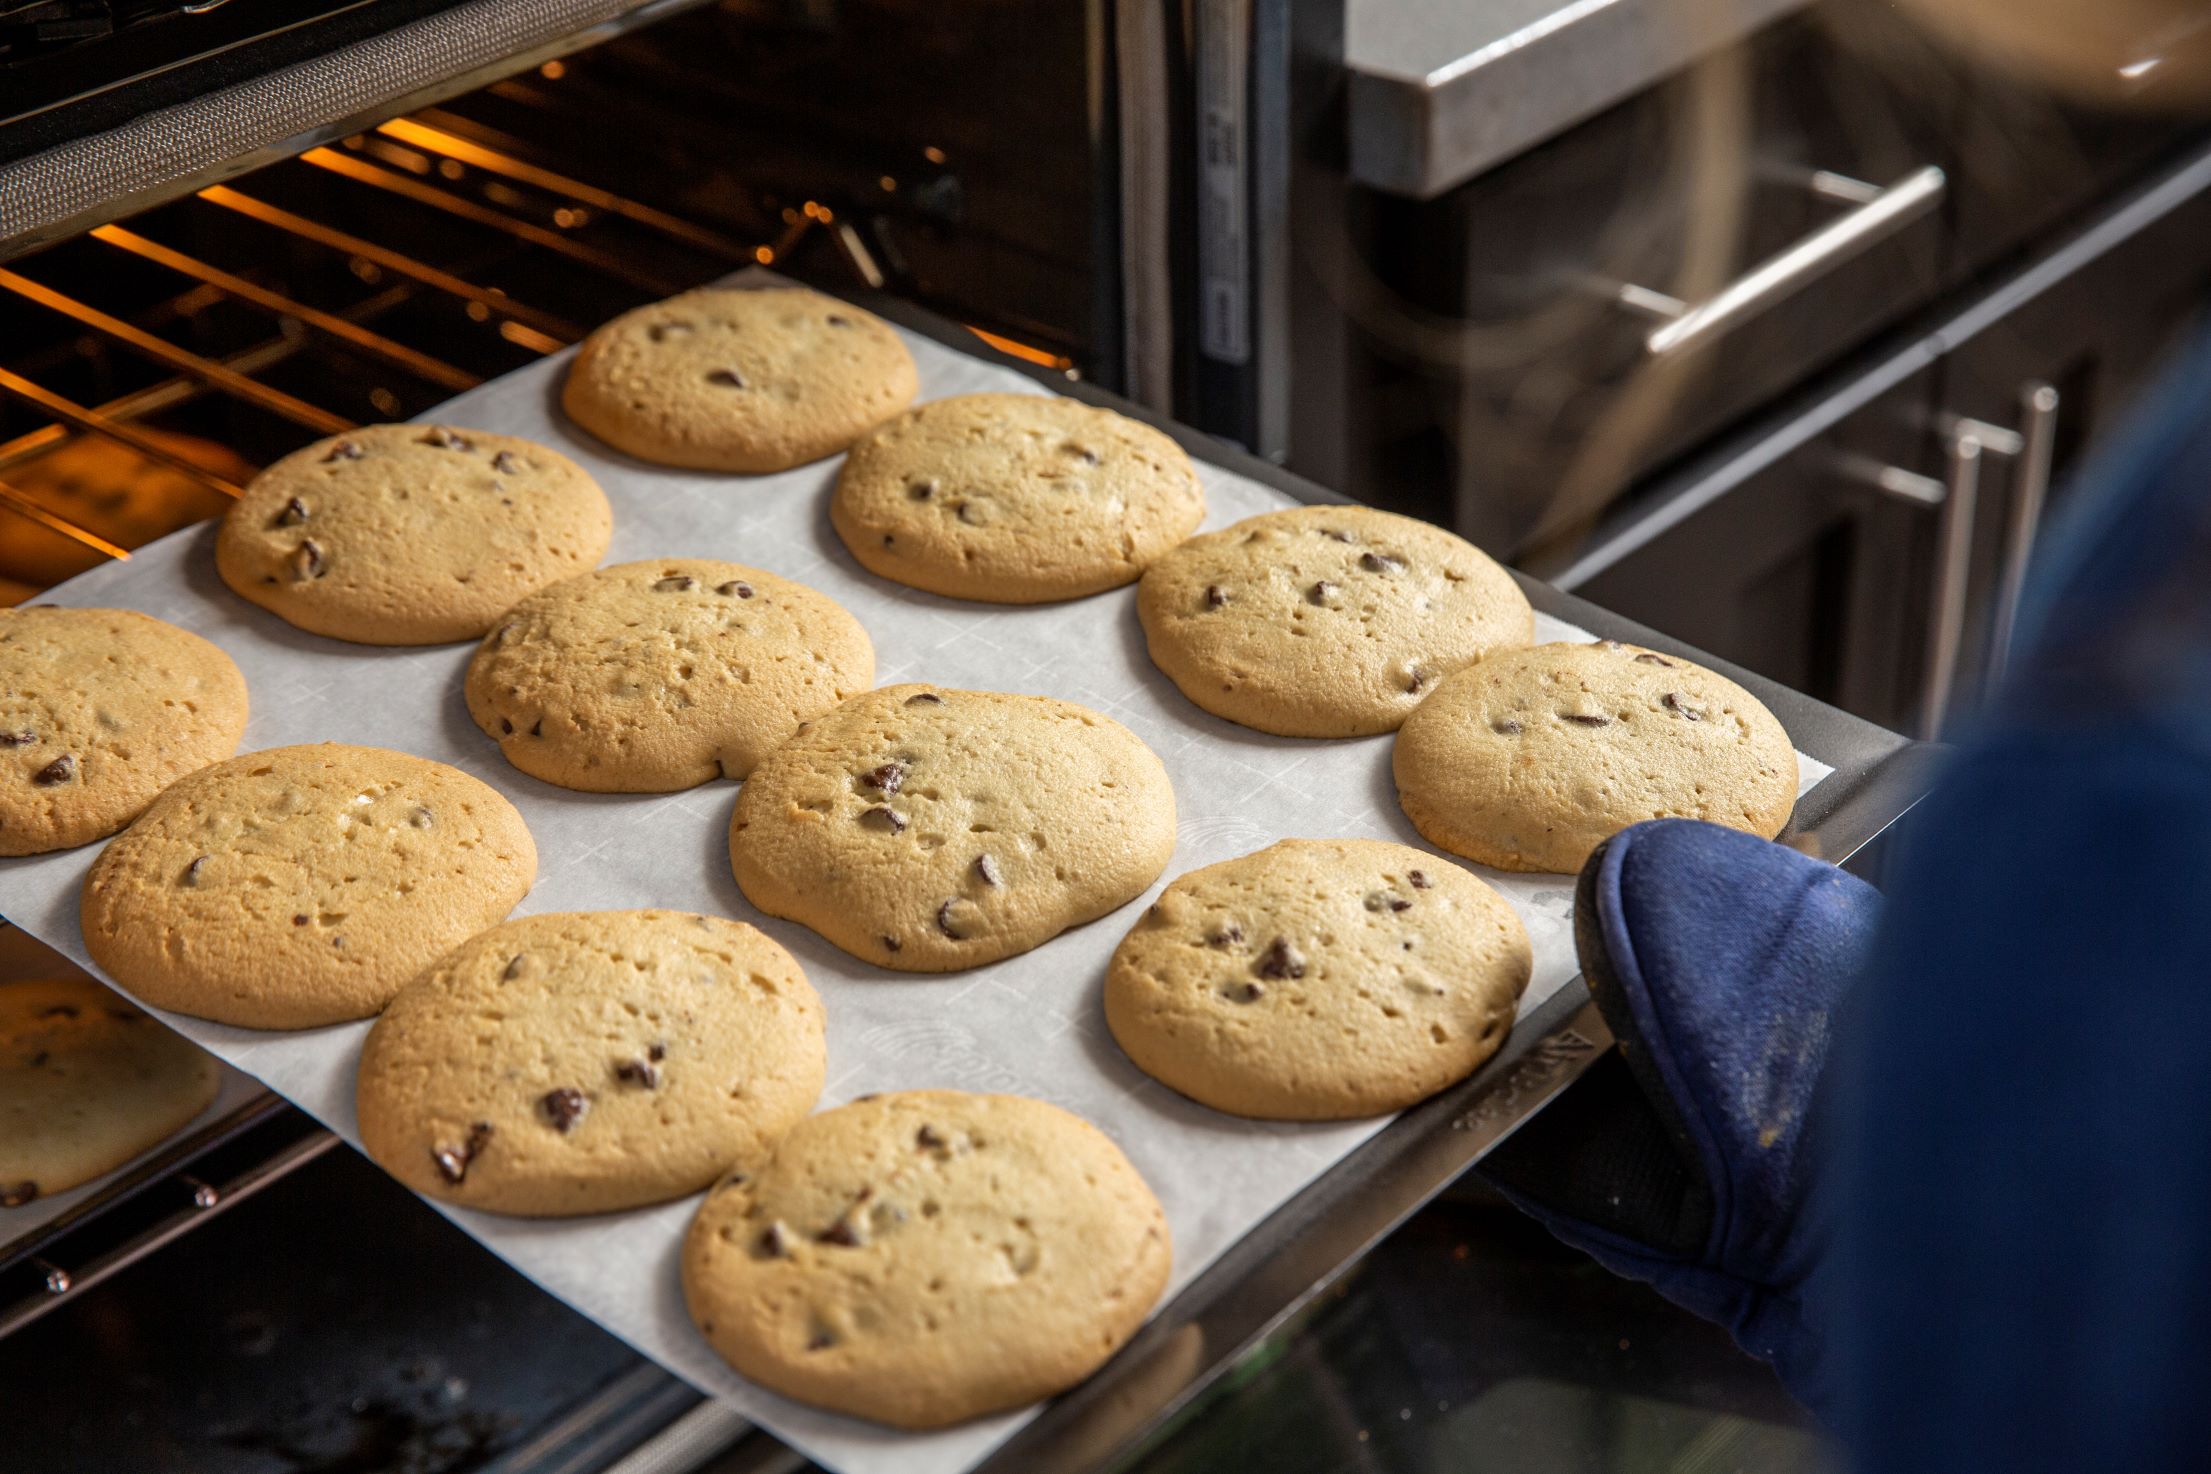 An image of a warm batch of Tiff's Treats cookies being removed from the oven.